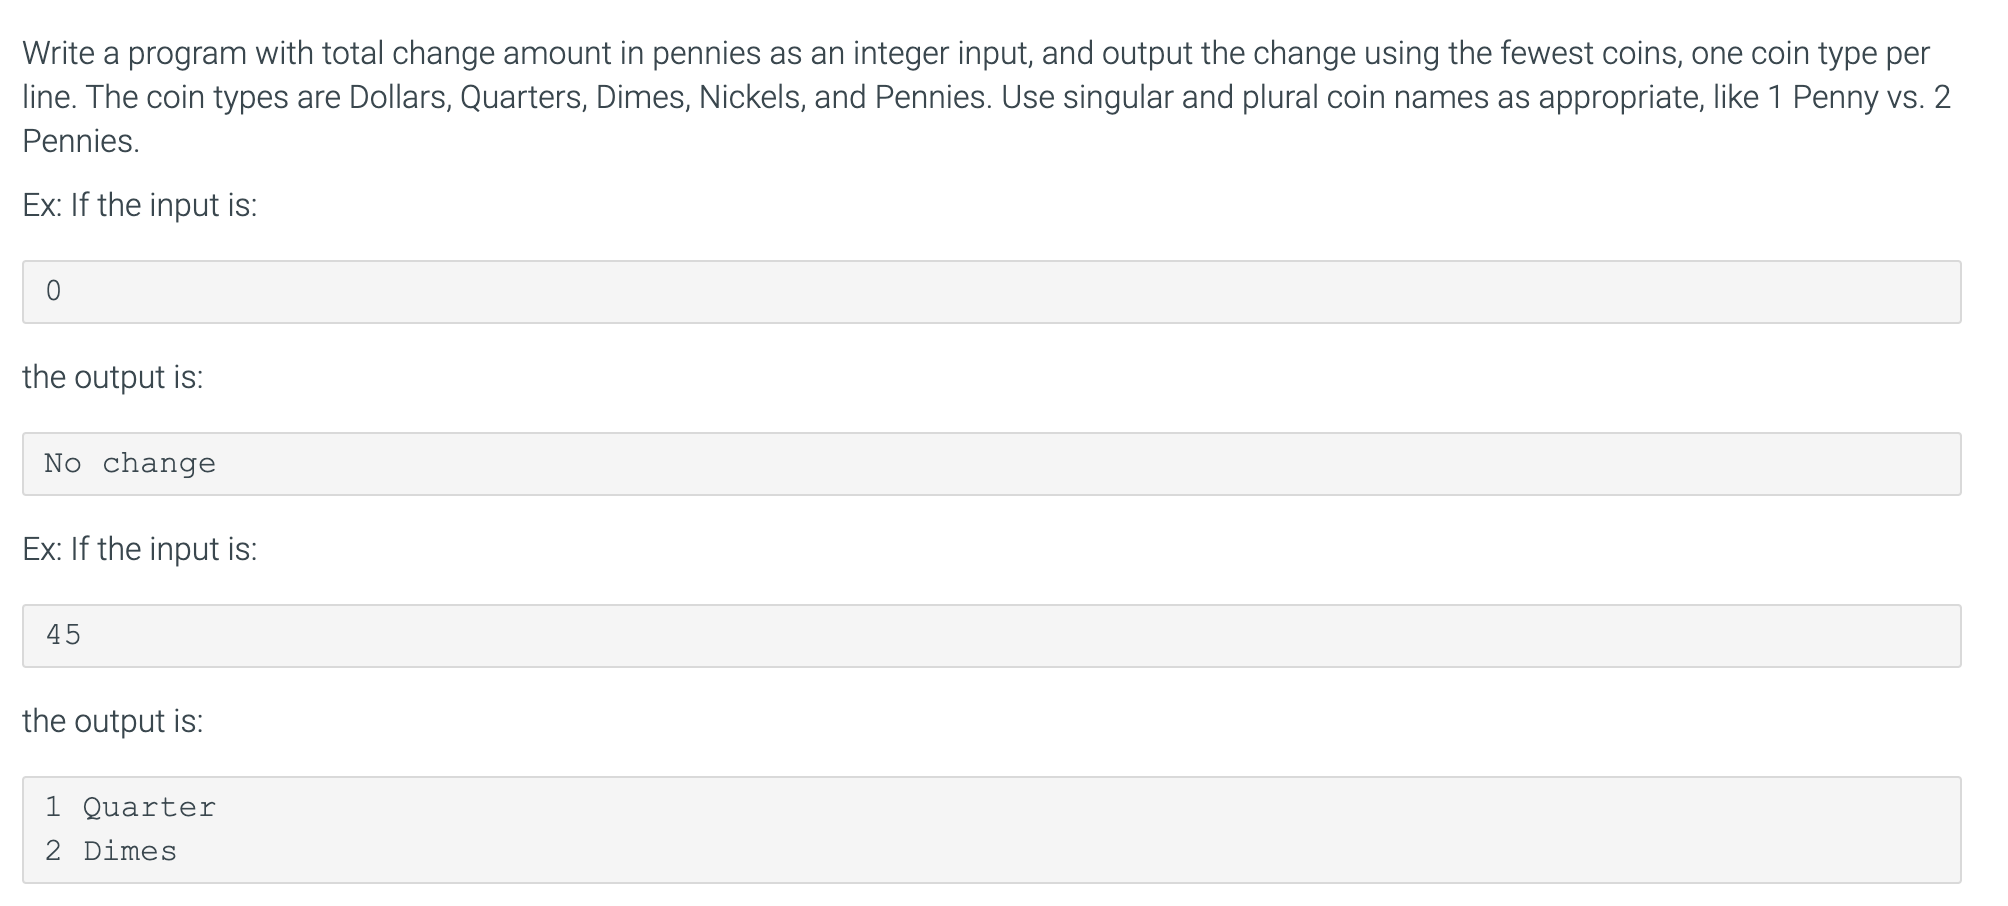 Write a program with total change amount in pennies as an integer input, and output the change using the fewest coins, one coin type per
line. The coin types are Dollars, Quarters, Dimes, Nickels, and Pennies. Use singular and plural coin names as appropriate, like 1 Penny vs. 2
Pennies.
